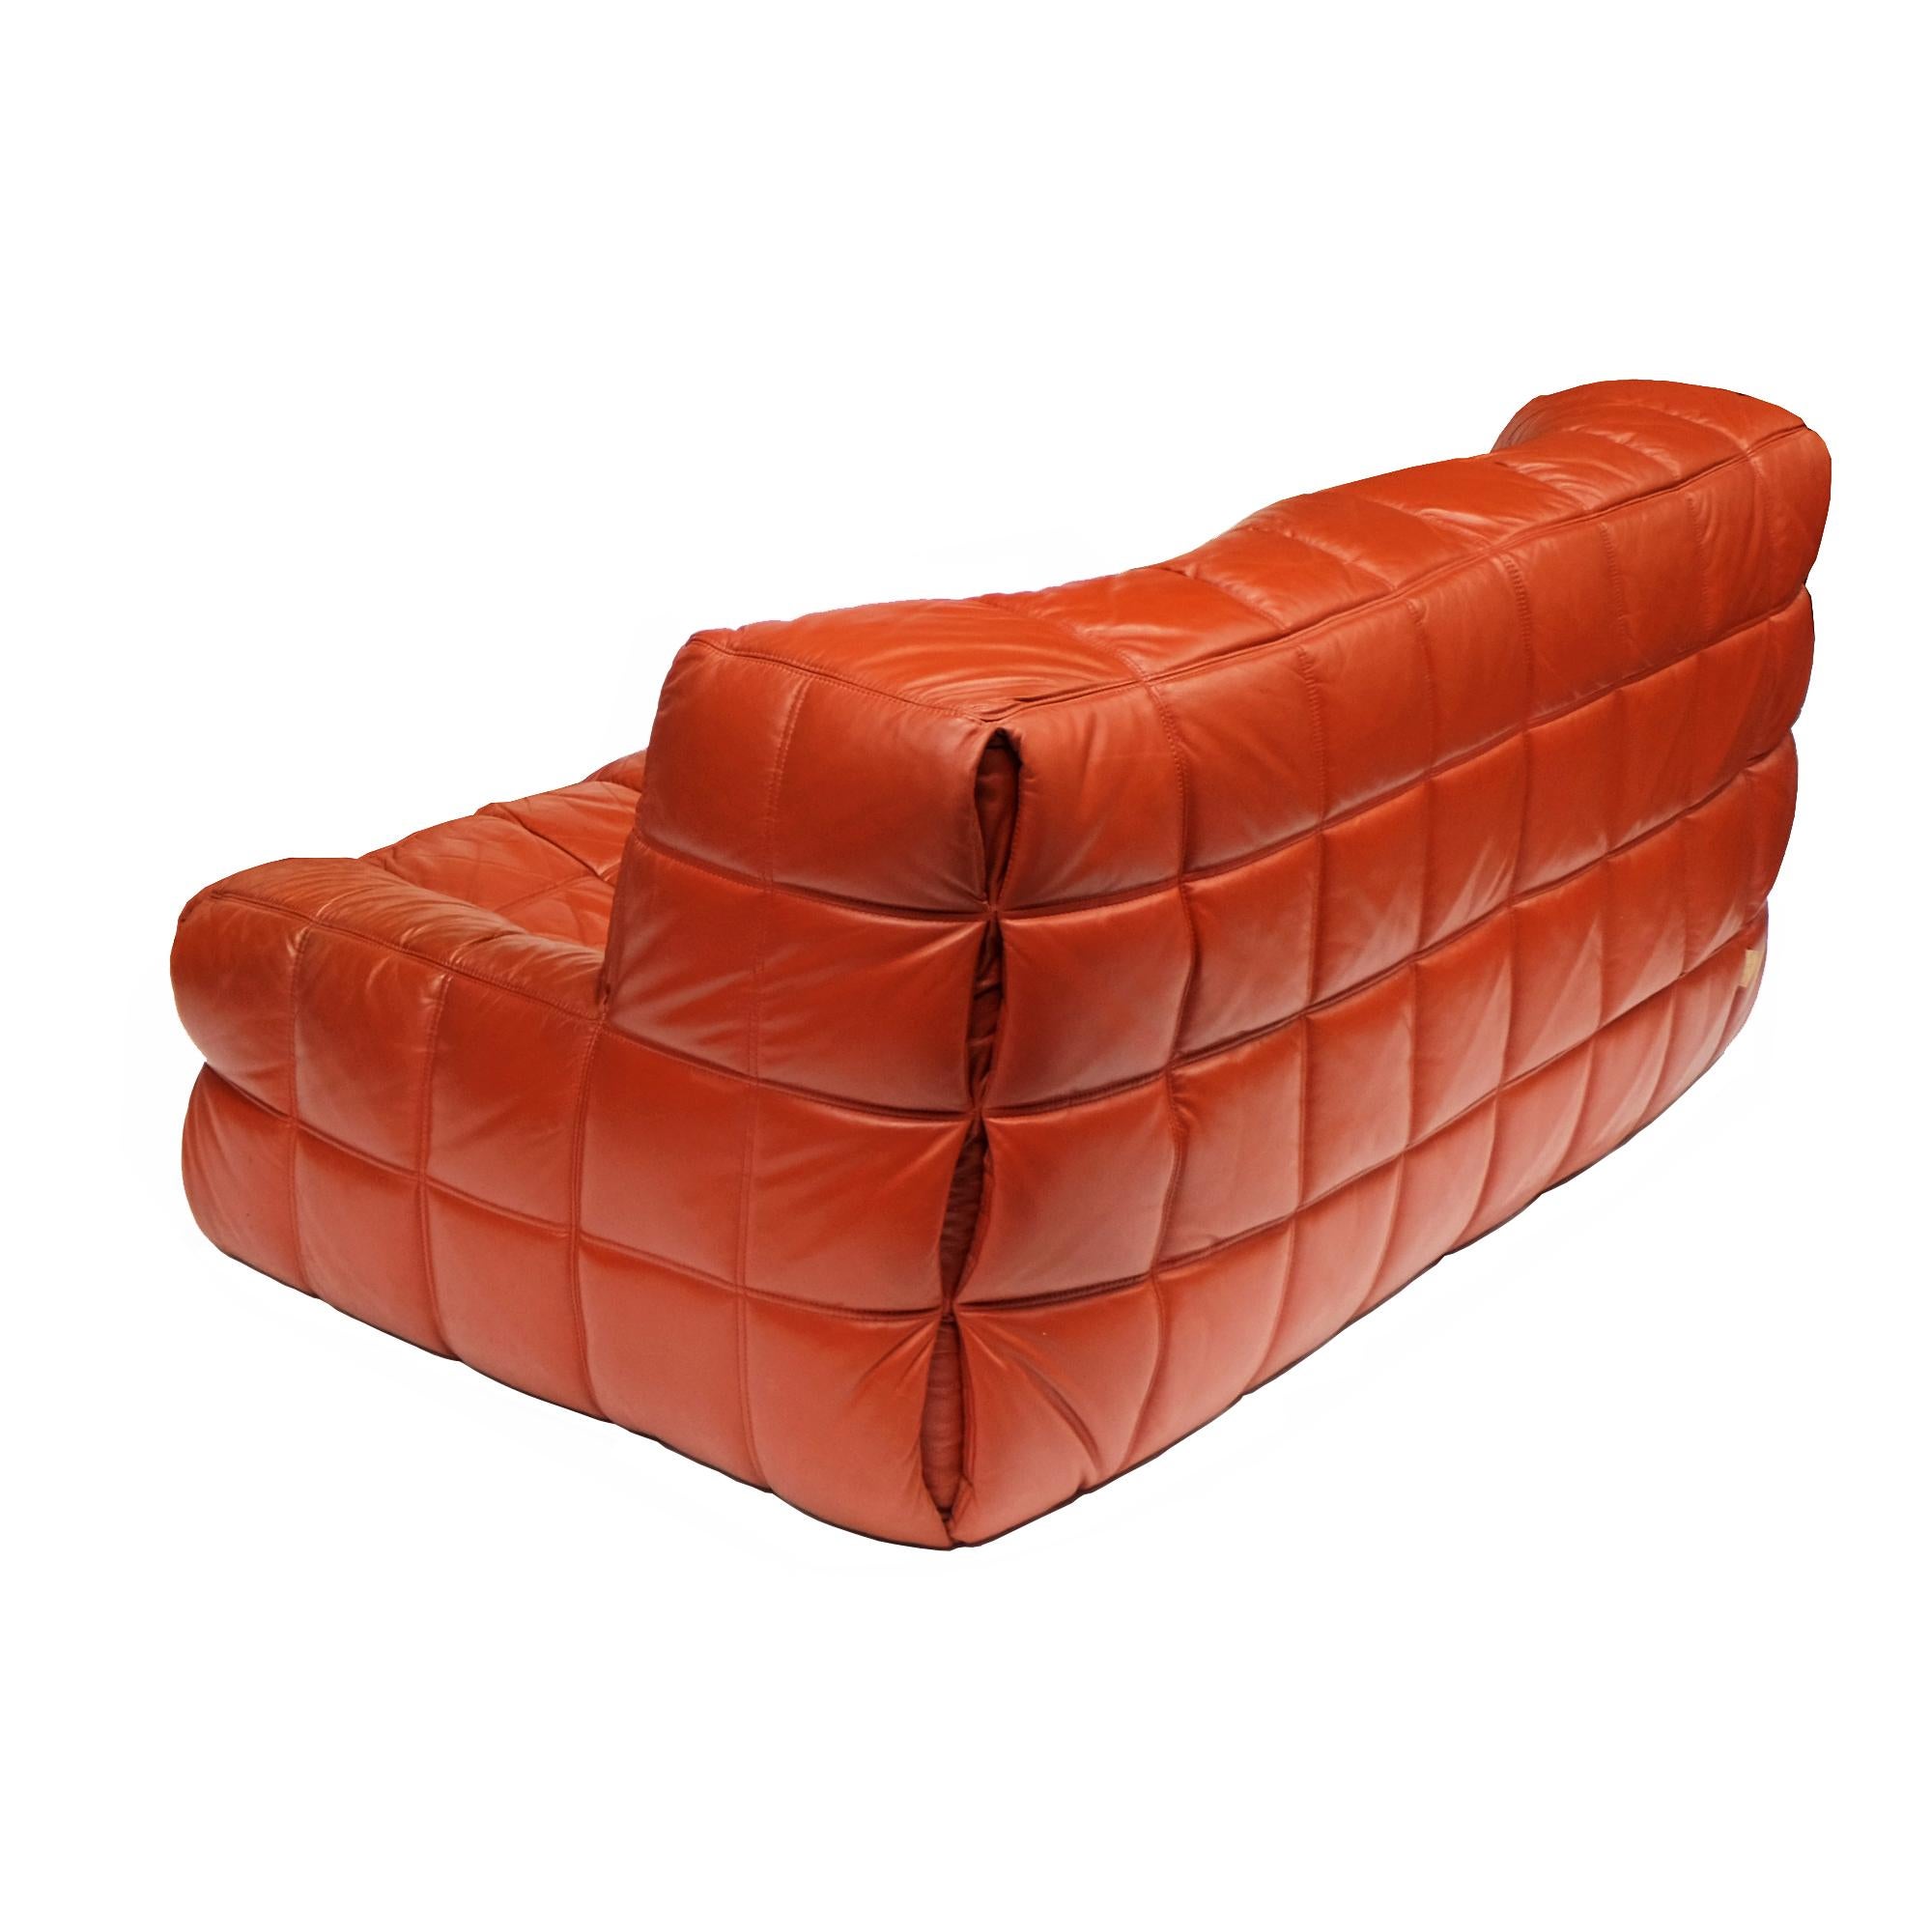 Two-seat sofa designed by Michel Ducaroy for Ligne Roset, 1976.

Foam seating elements upholstered in stitched leather.

Ligne Roset labels.

Sofa H 75cm x W 160cm x D 100cm.
 